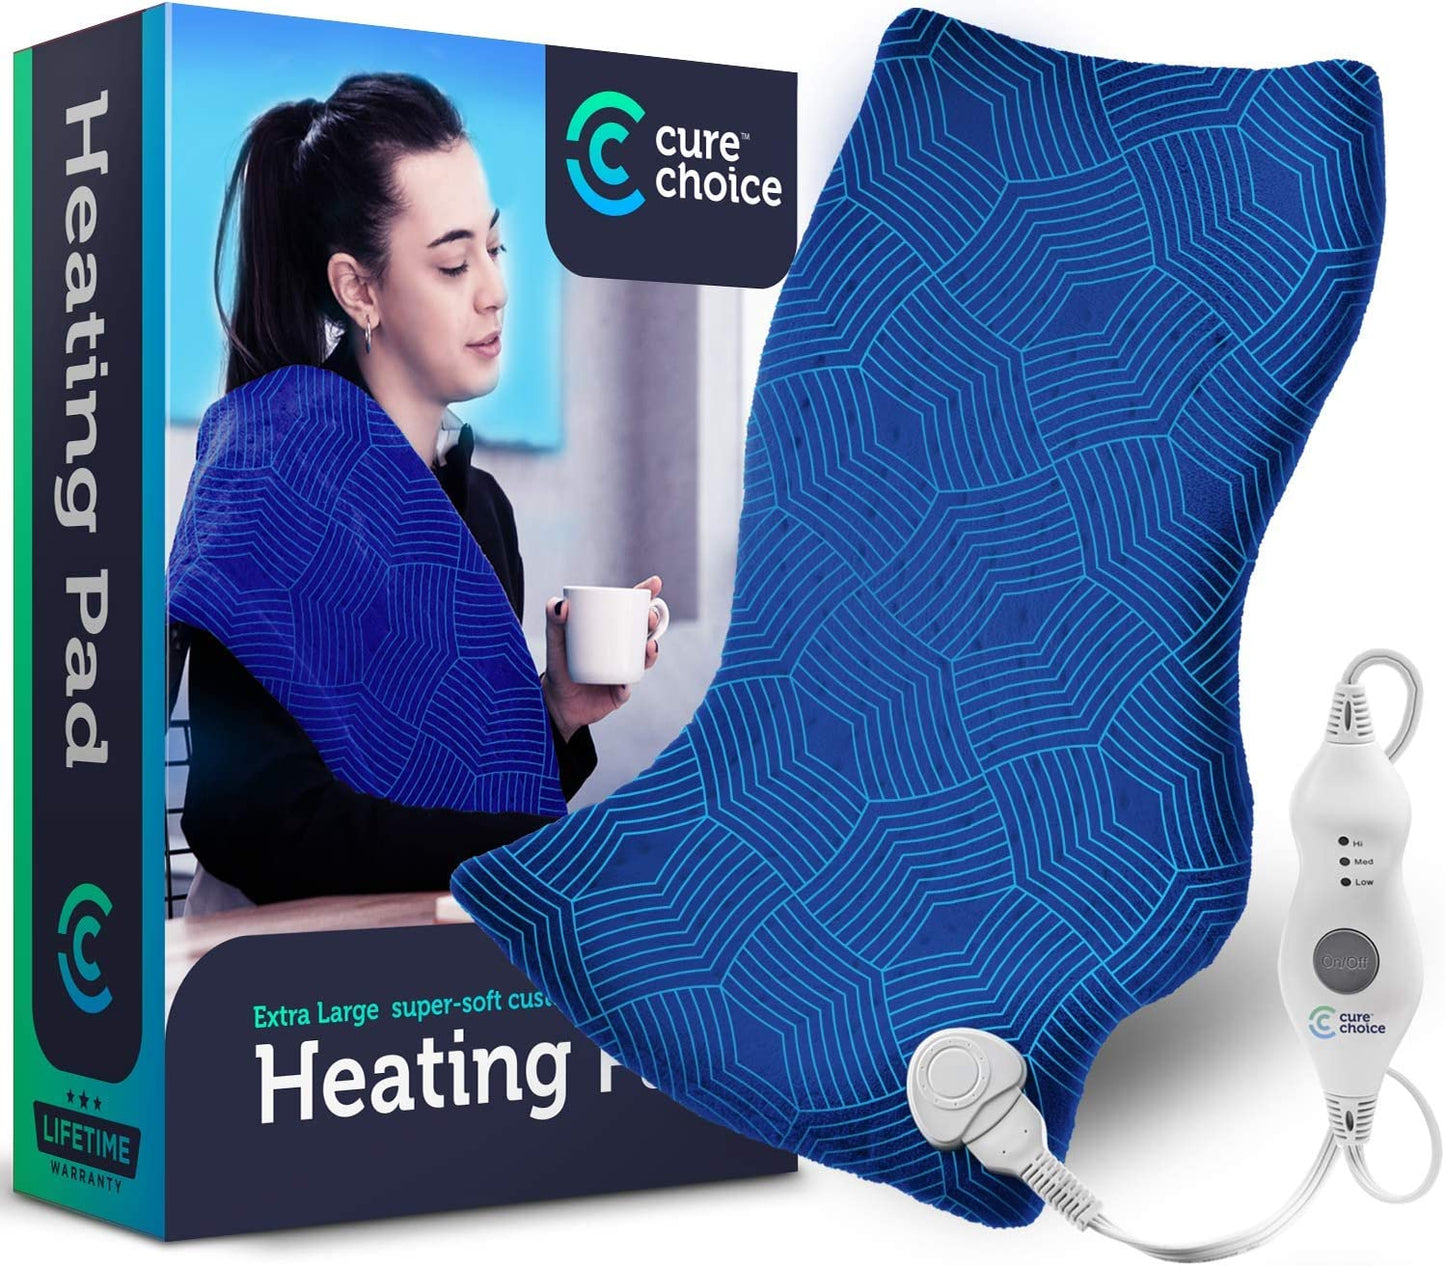 Large Electric Heating Pad for Back Pain Relief + Storage Pouch, Ultra Soft 12"X24" Heating Pad for Muscle Cramps - Heated Pad with Adjustable Temperature Settings, Safe Auto Shut